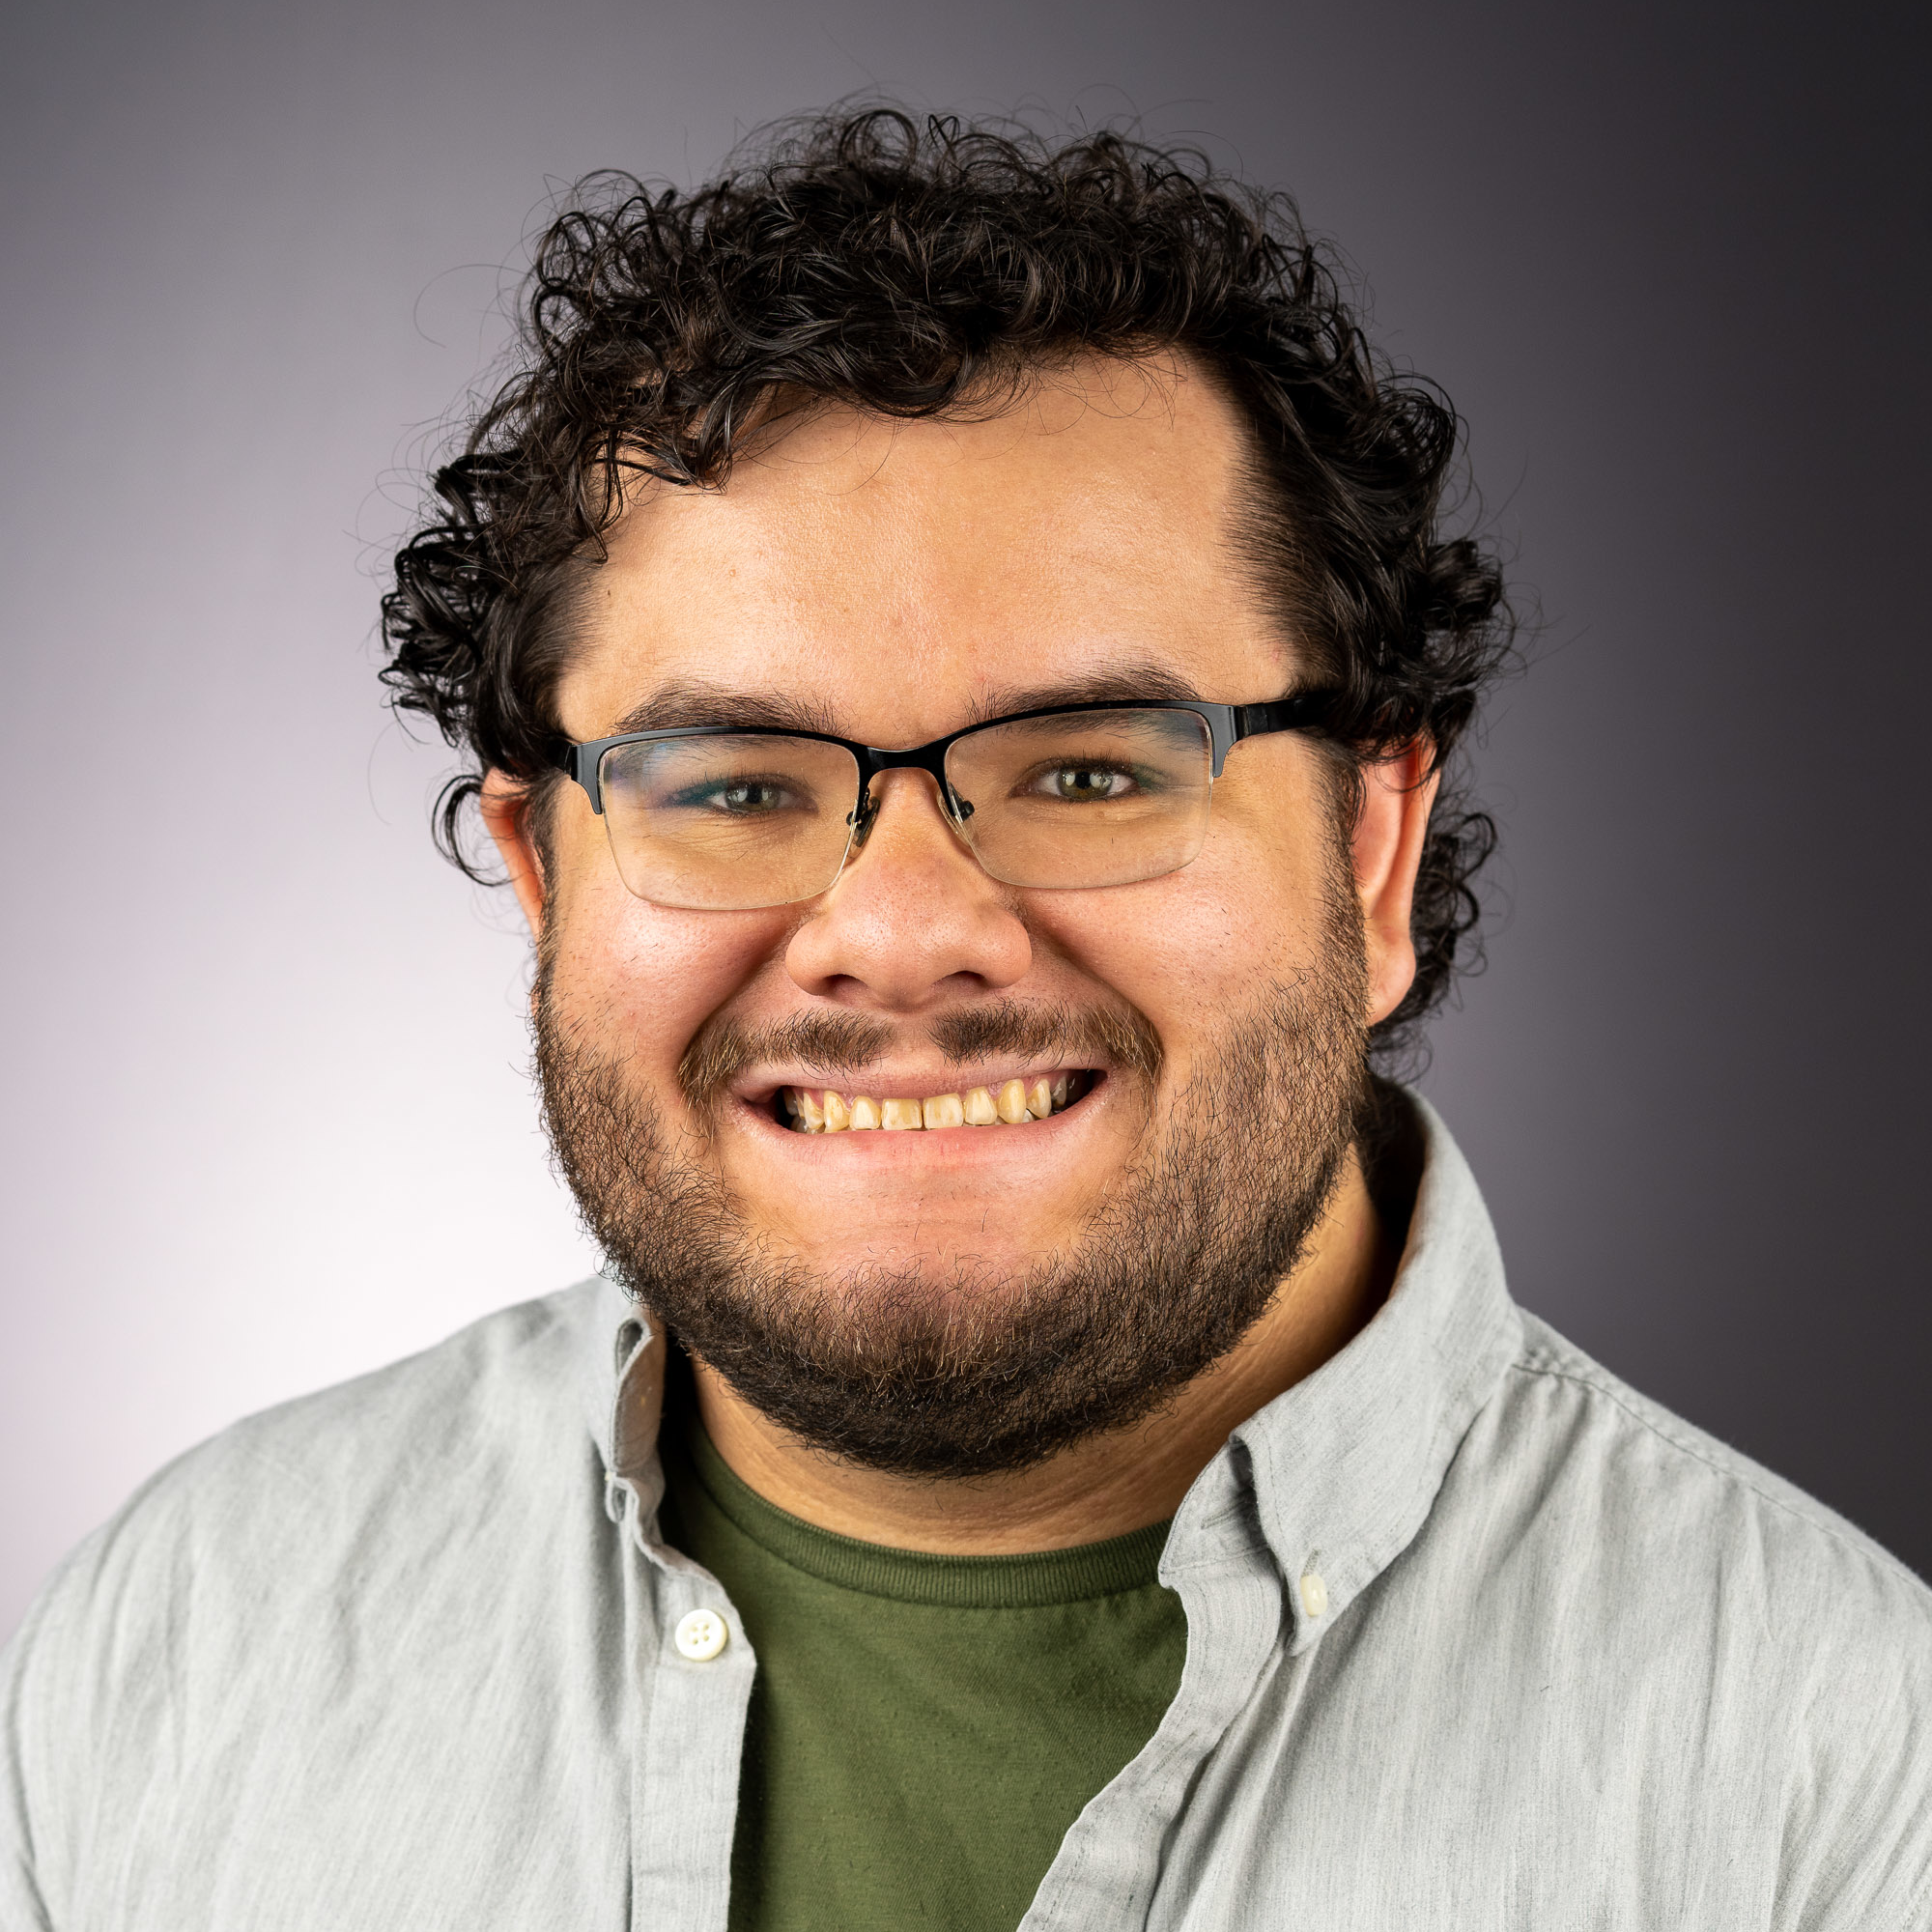 Headshot of Zachary, a smiling man with glasses, curly black hair, and a beard.